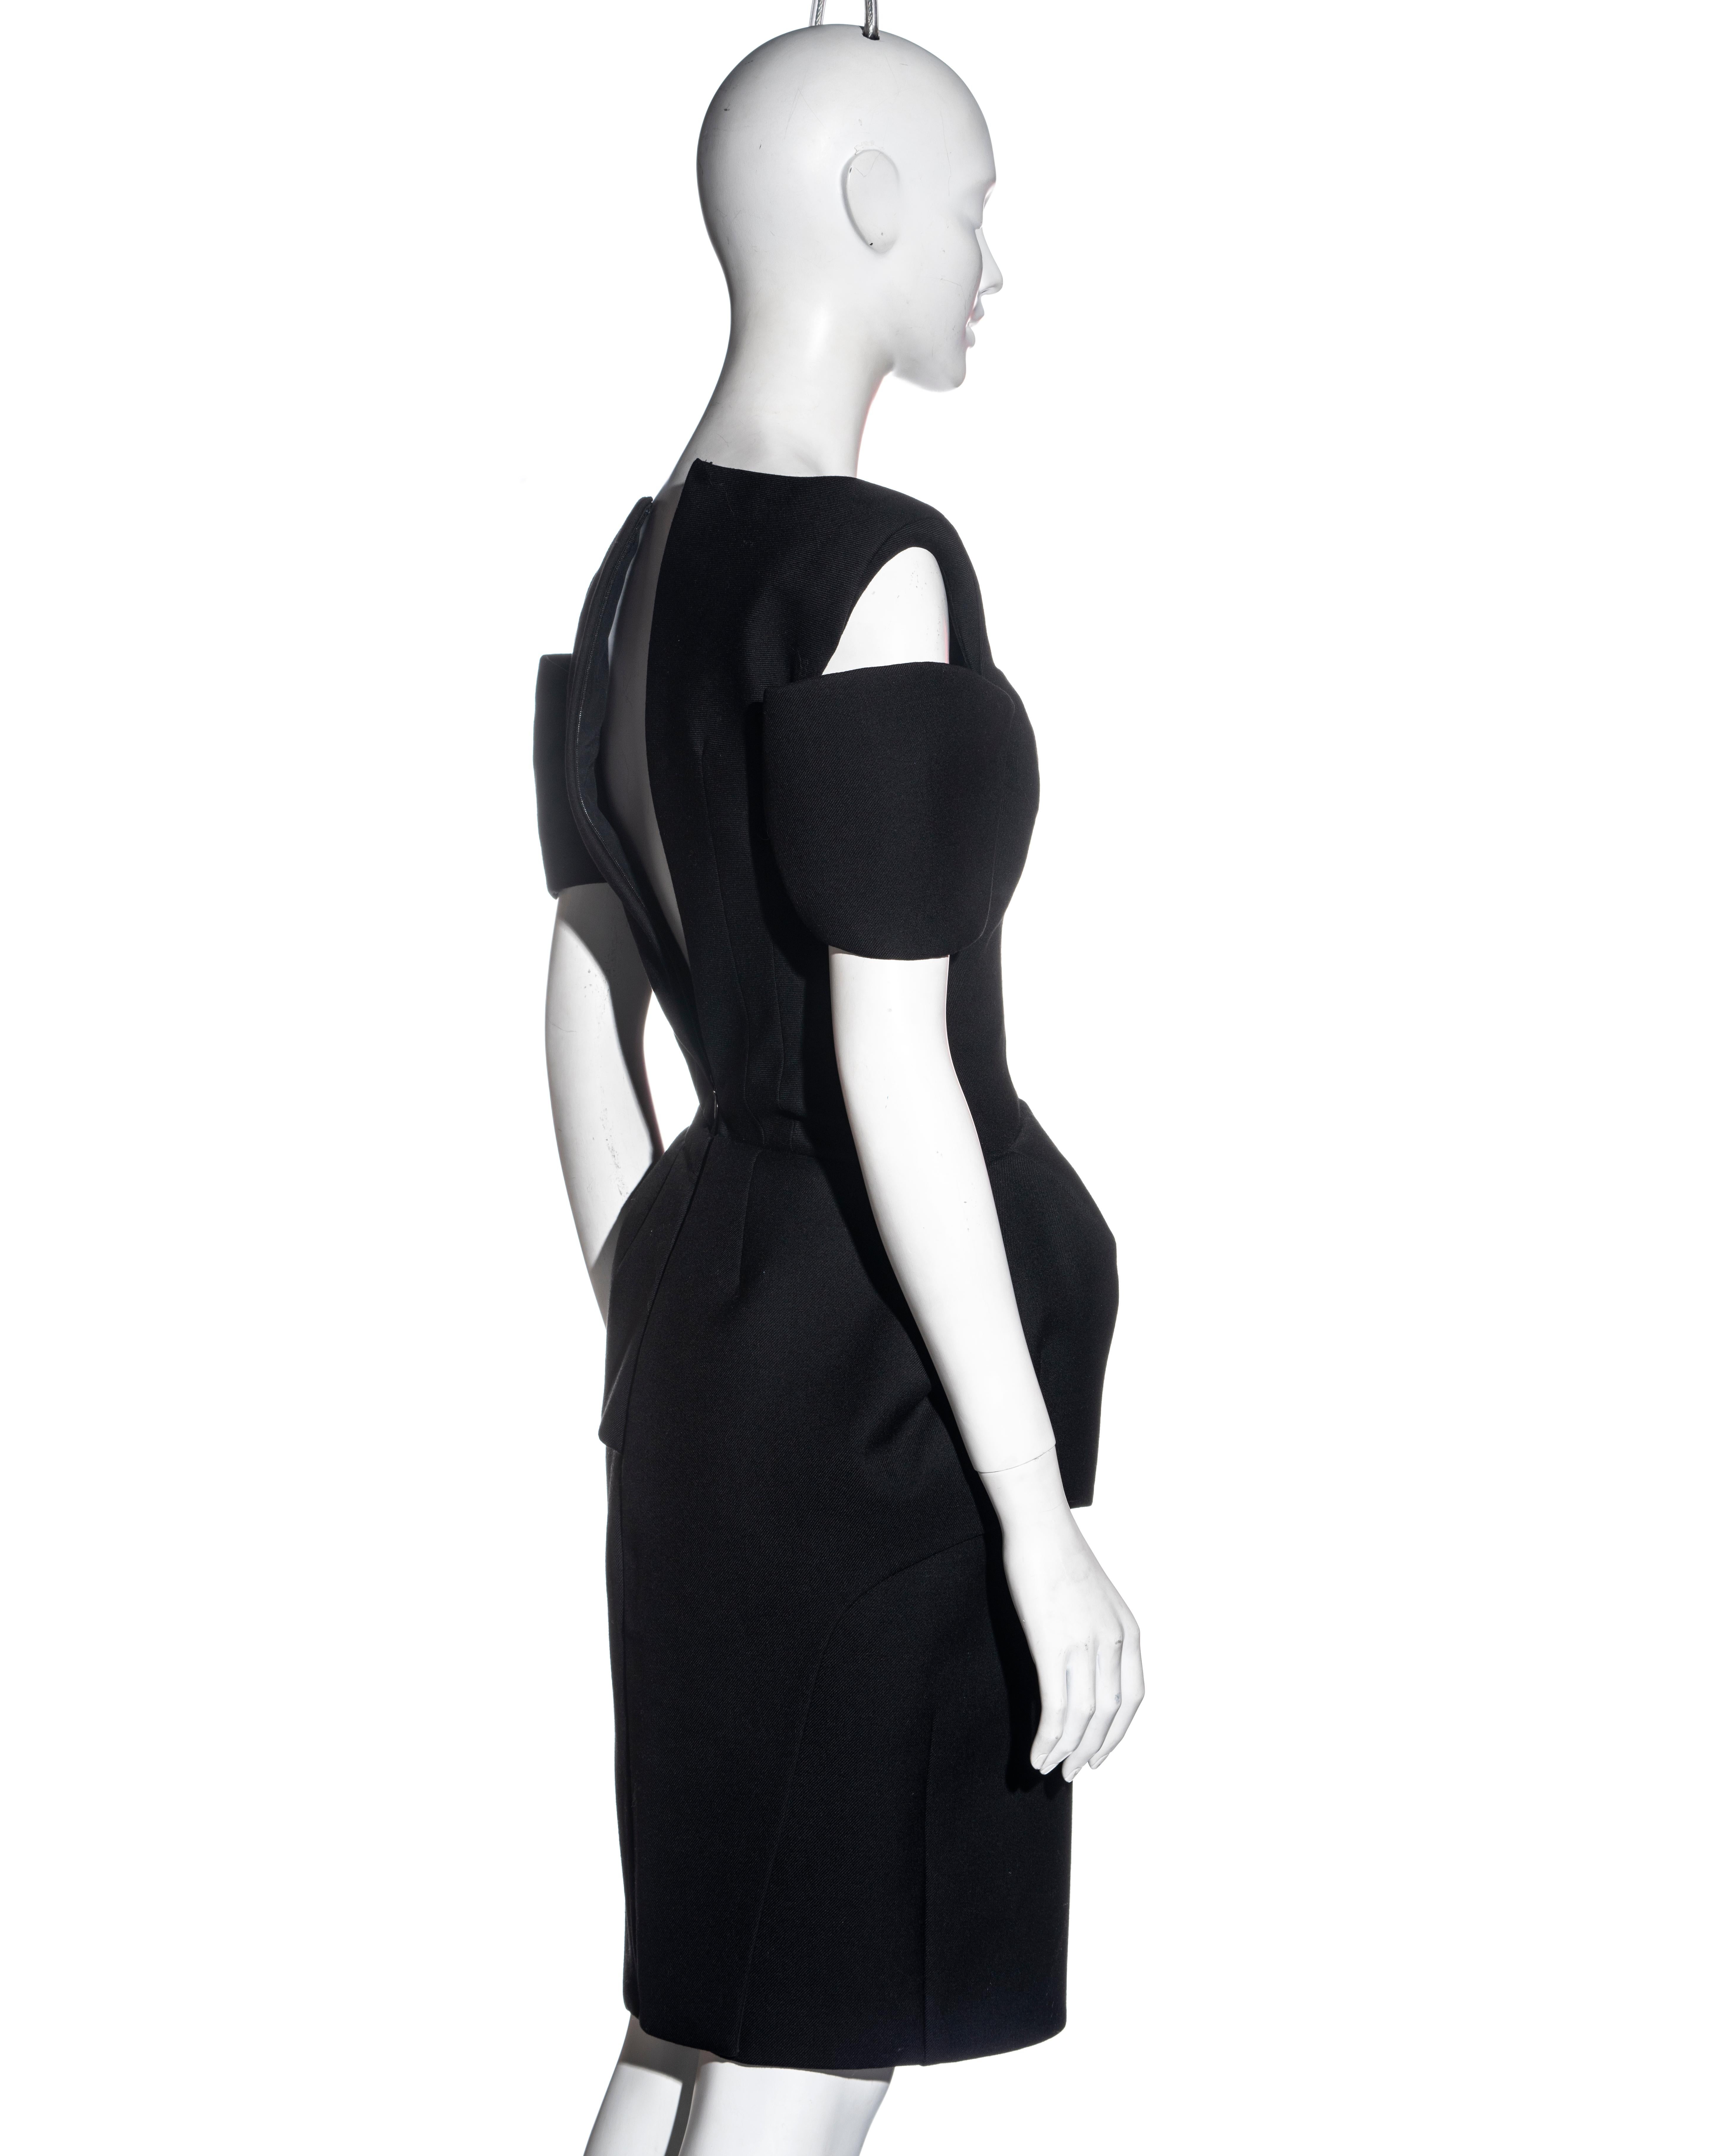 Balenciaga by Nicolas Ghesquière black wool structured cocktail dress, fw 2008 For Sale 3